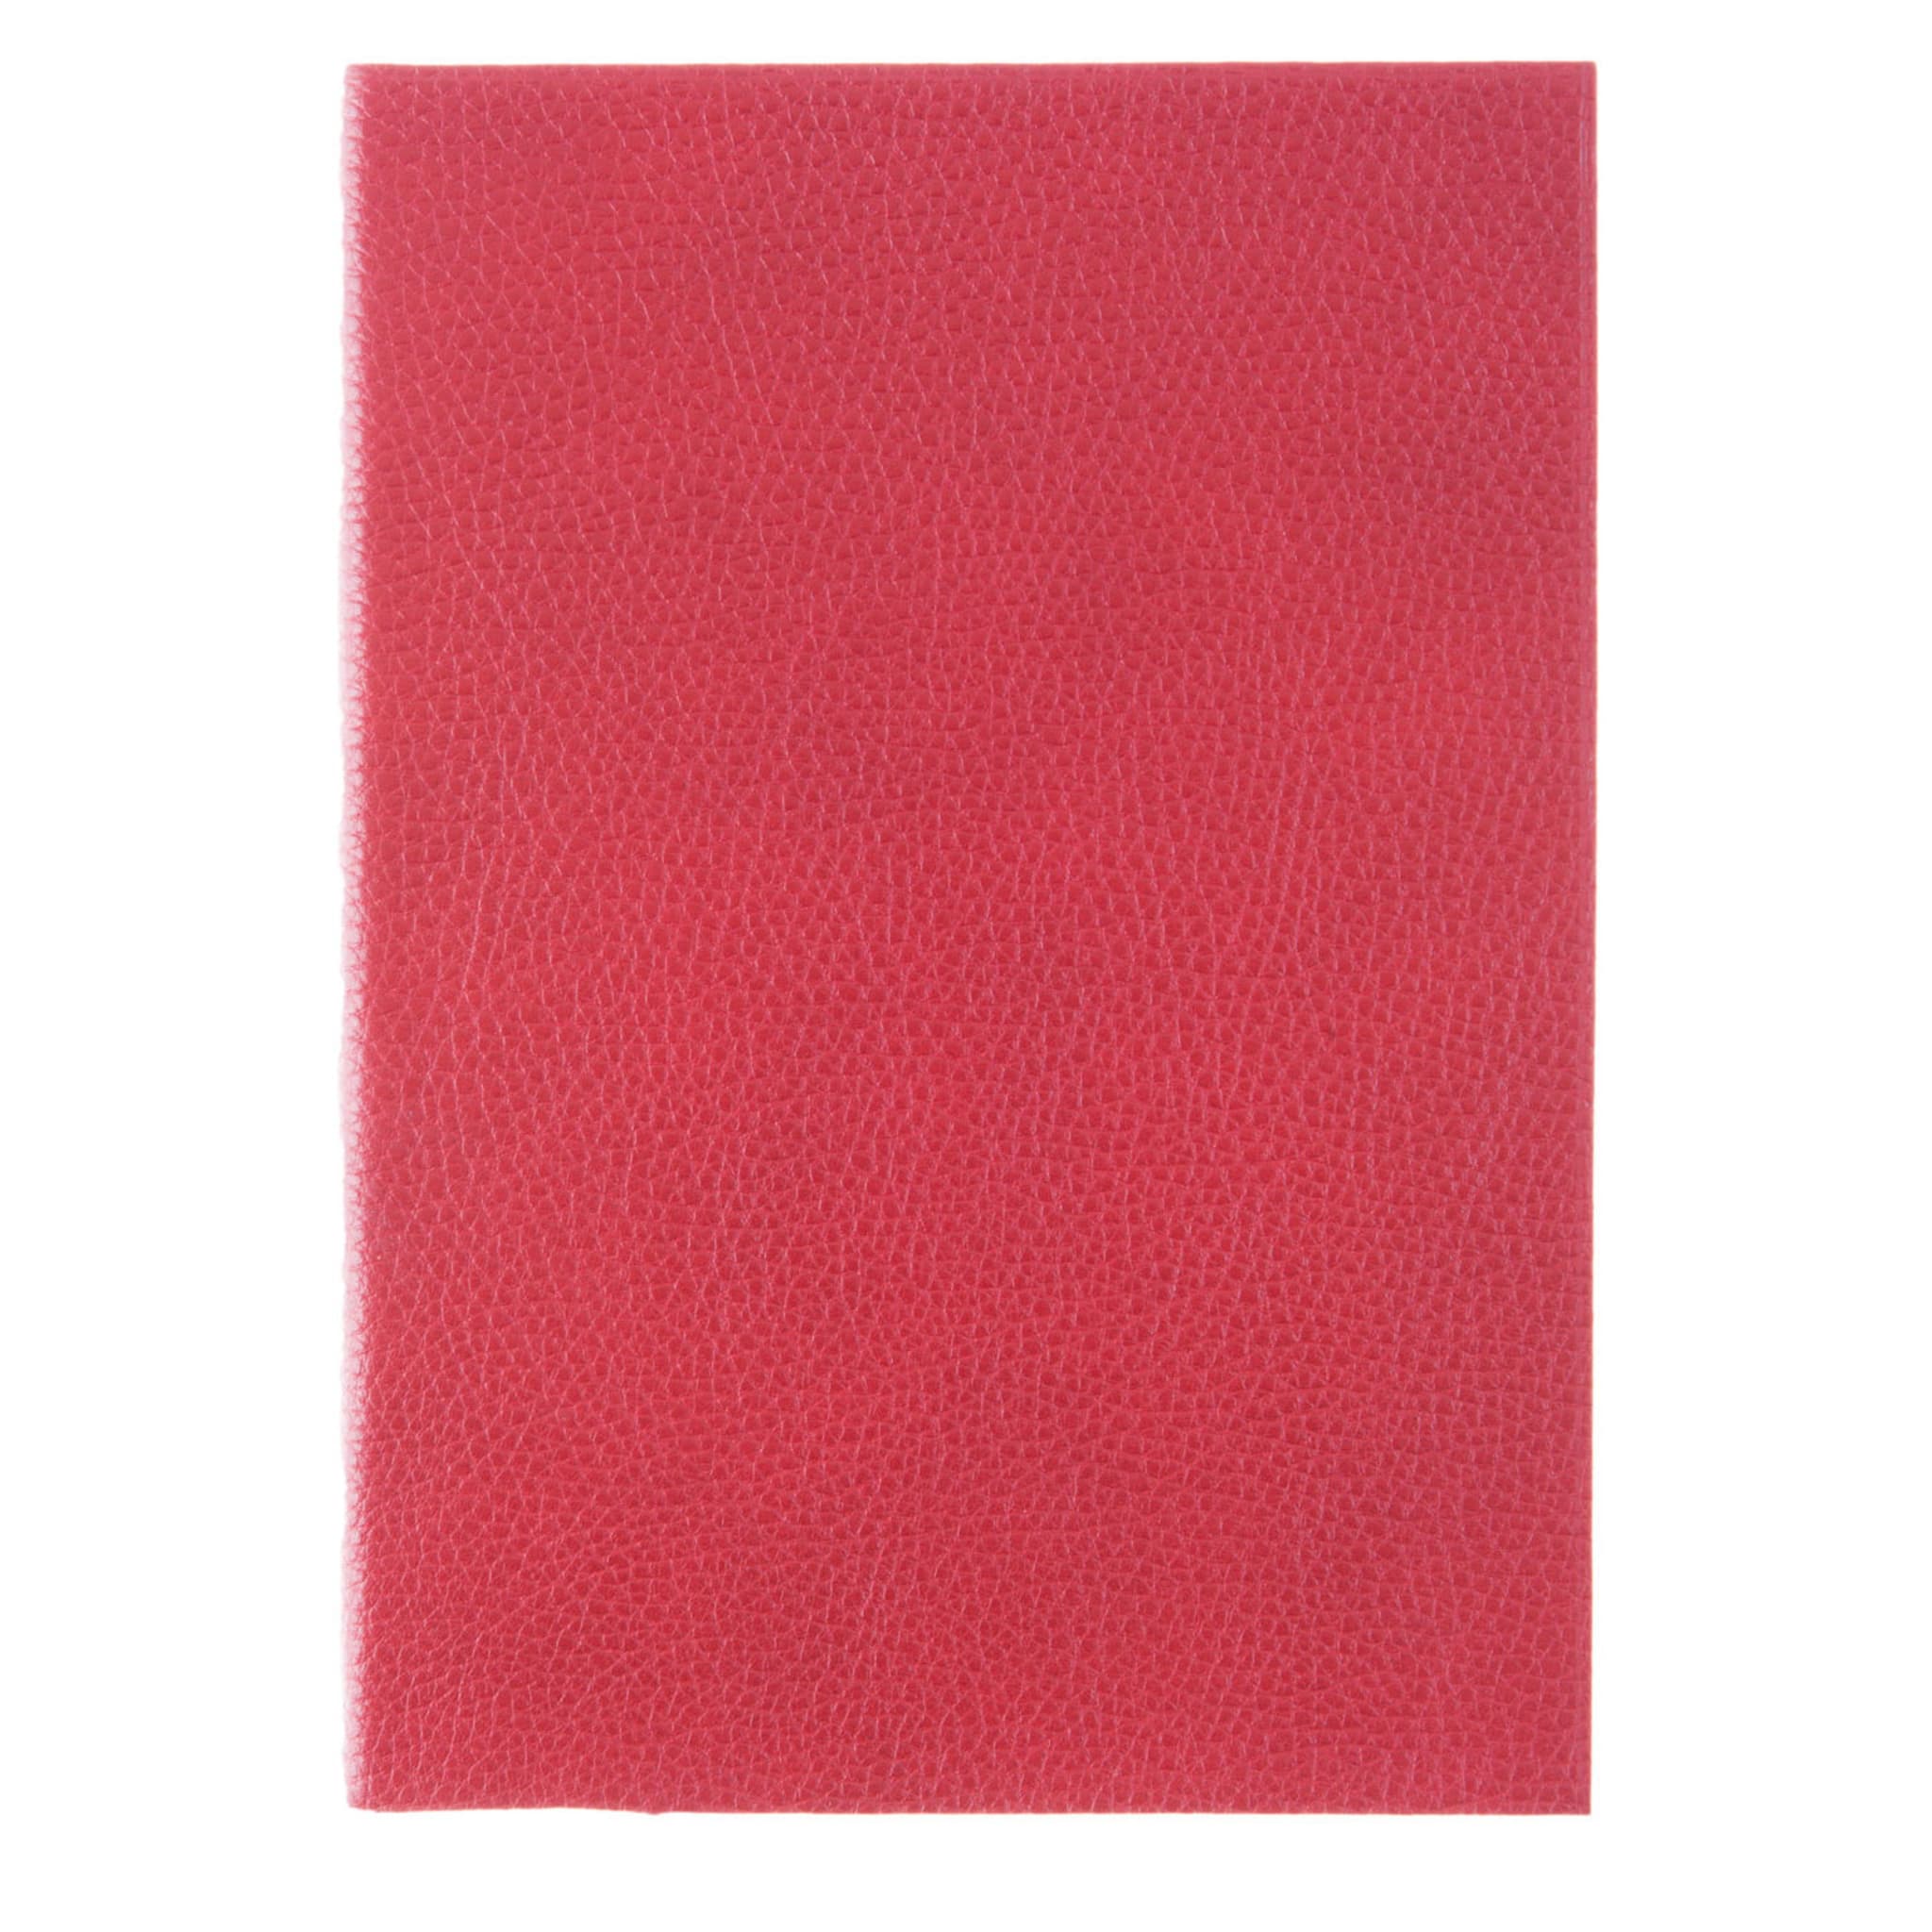 Red Leather Notebook - Alternative view 1